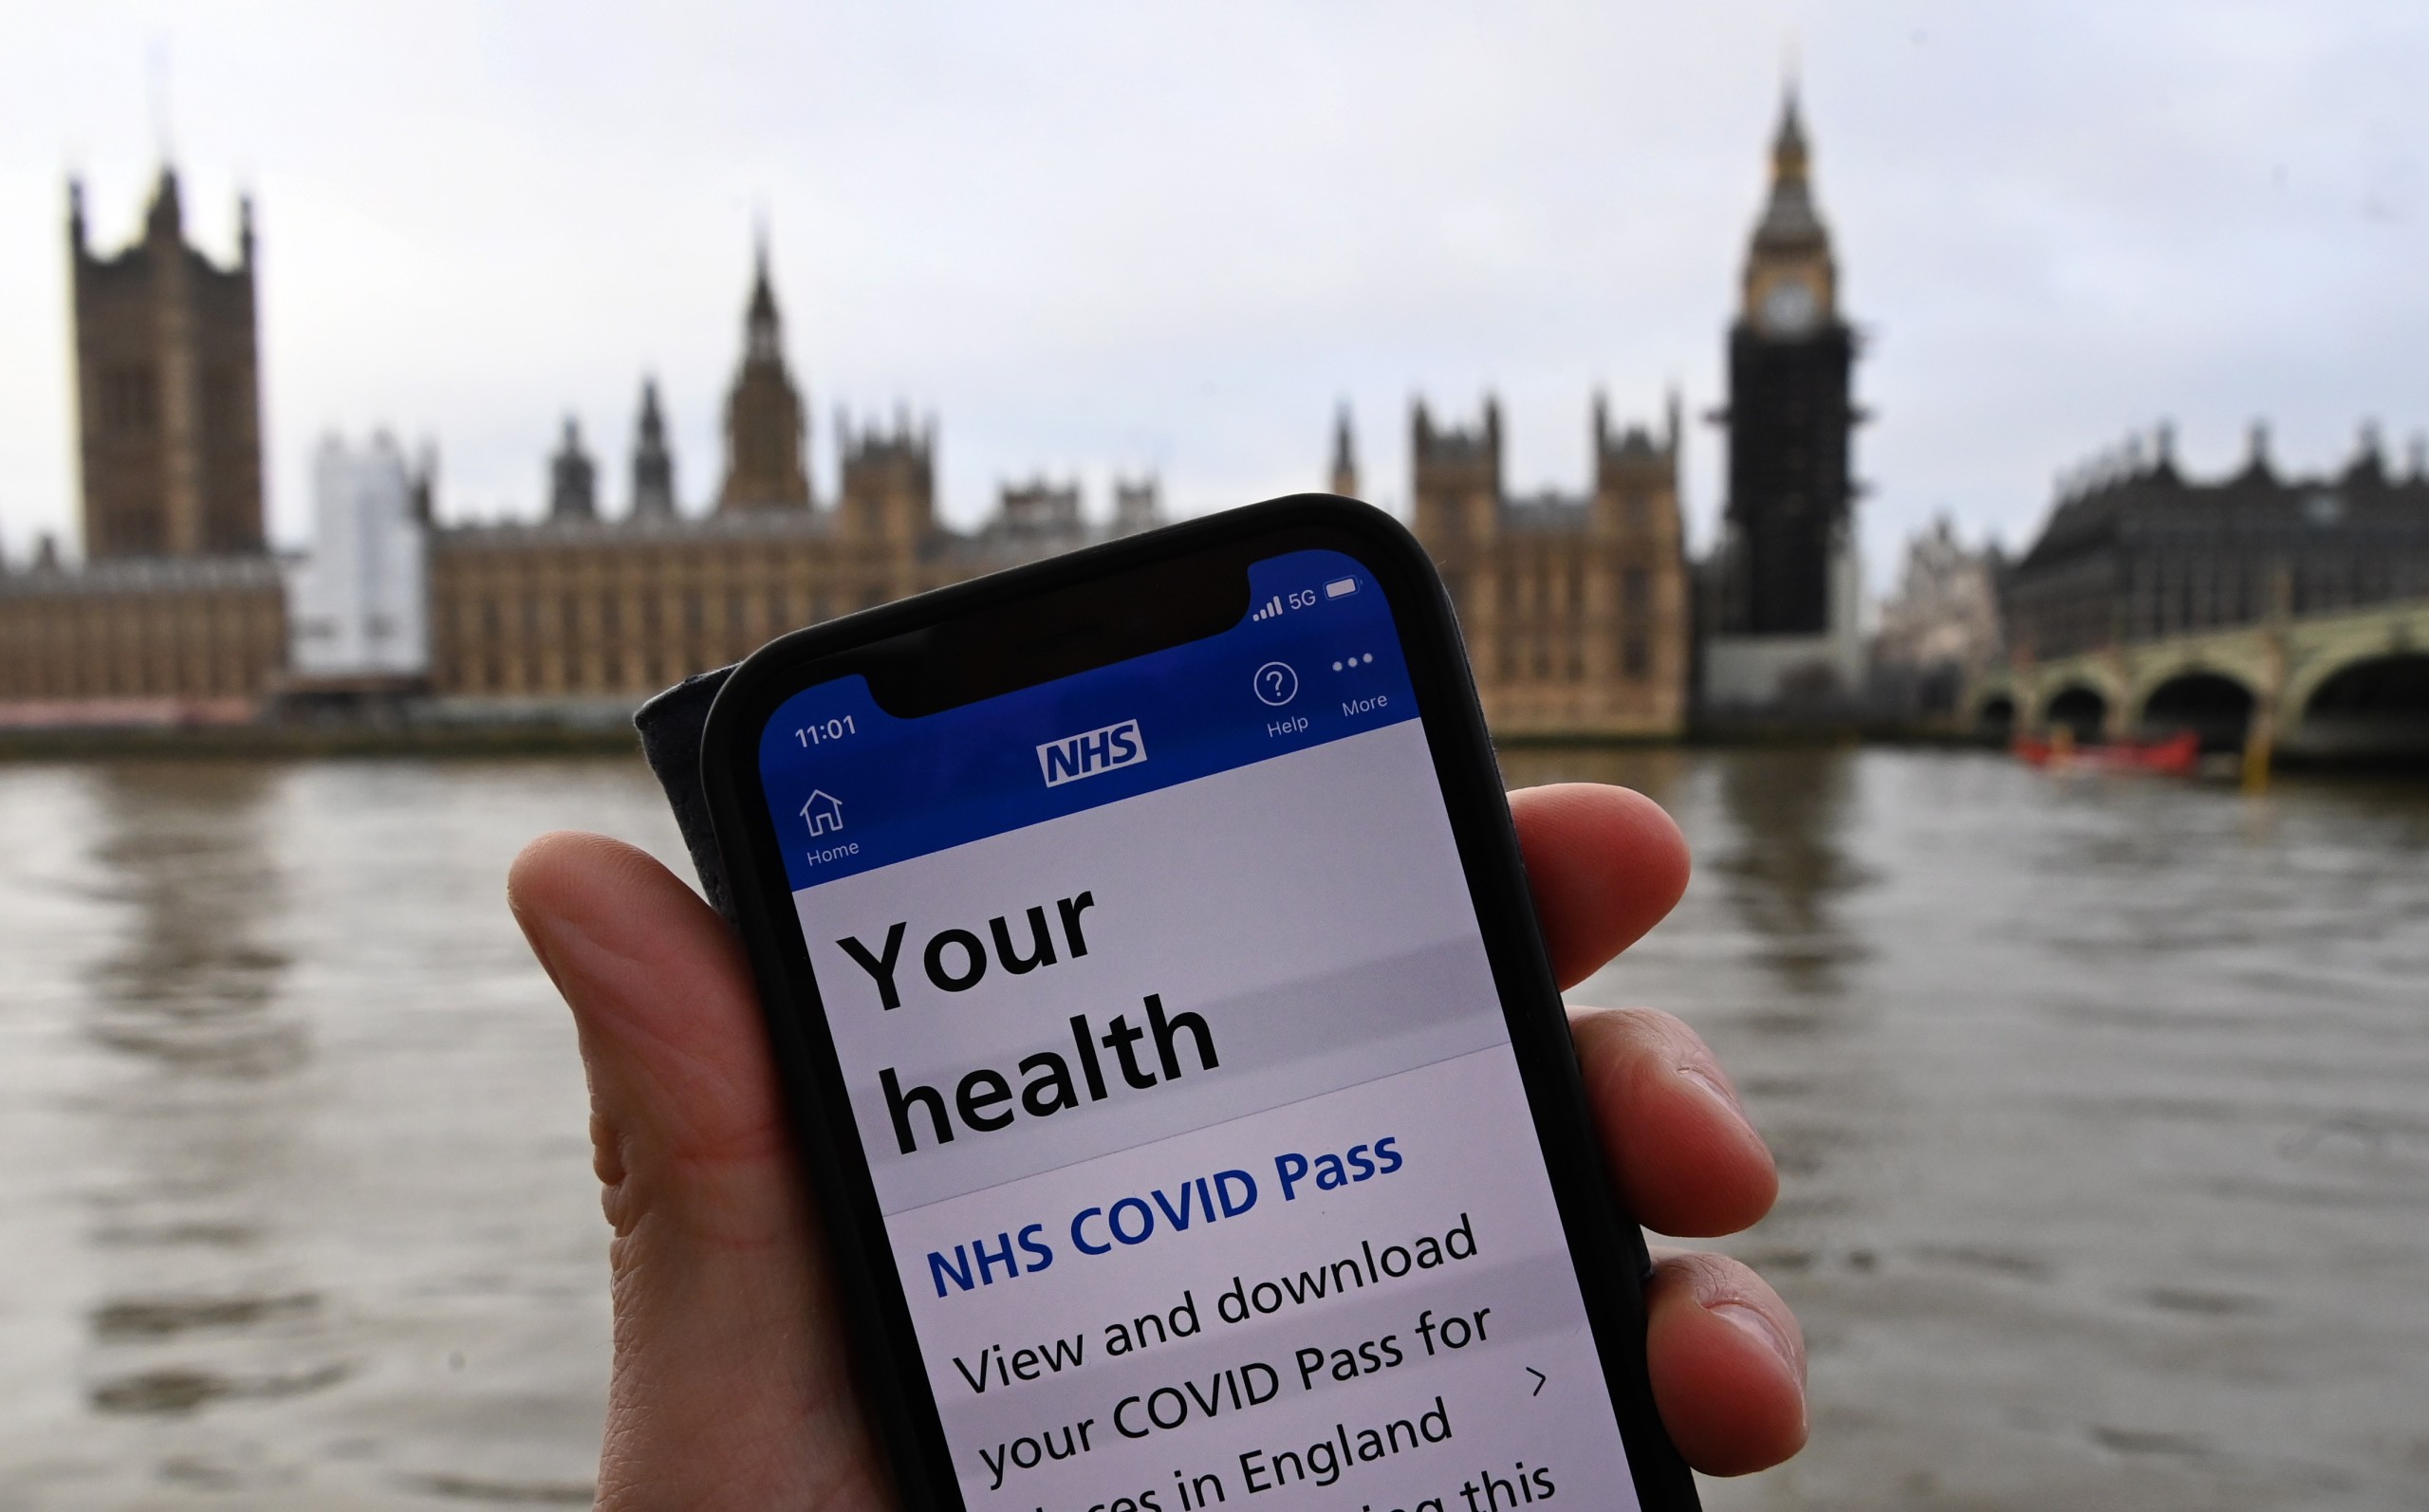 epa09641257 A Covid-19 pass is displayed on a mobile handset in London, Britain, 14 December 2021. Parliament in England is set to vote on the controversial Covid passports as Prime Minister Boris Johnson looks to push through his the new measures to counter the spread of the Omicron variant. Over seventy of Johnson's MP's are against the so called Covid passports, which could be mandatory for people to enter large events. The UK government has warned the public that the country is facing a 'tidal wave' of Omicron infections.  EPA/ANDY RAIN